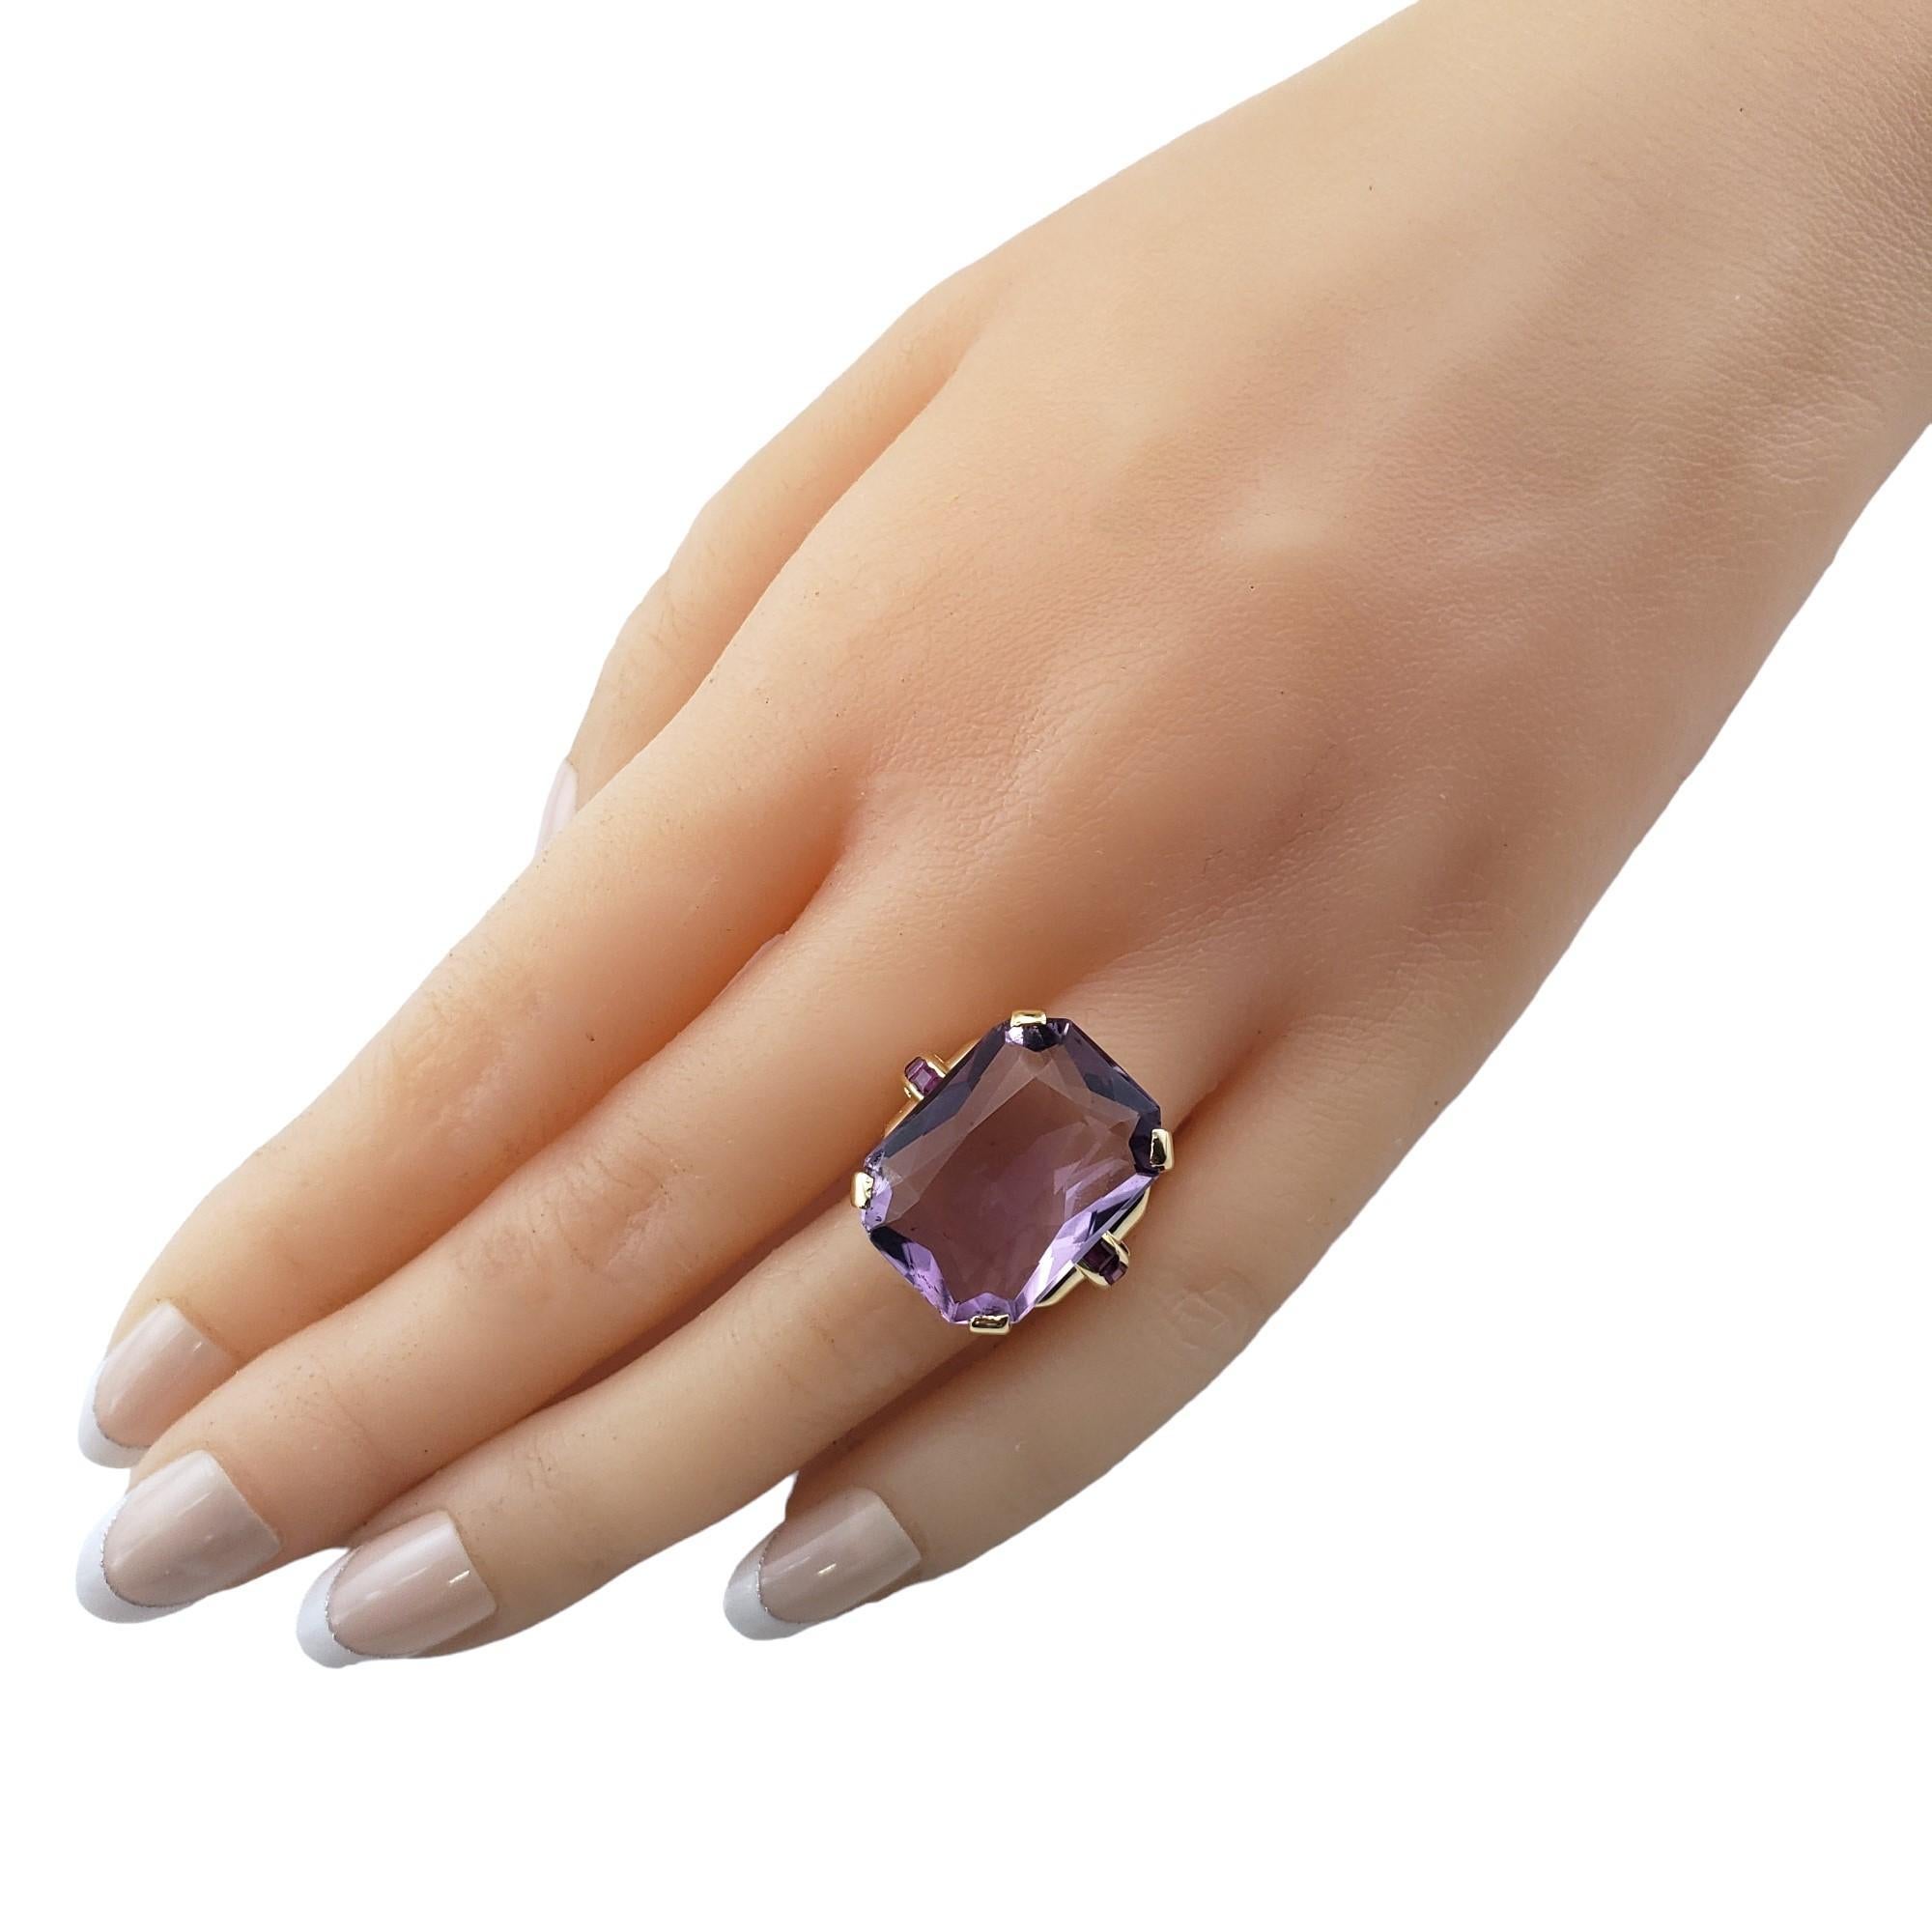  14K Yellow Gold Amethyst and Garnet Ring Size 6.75 #15463 For Sale 2